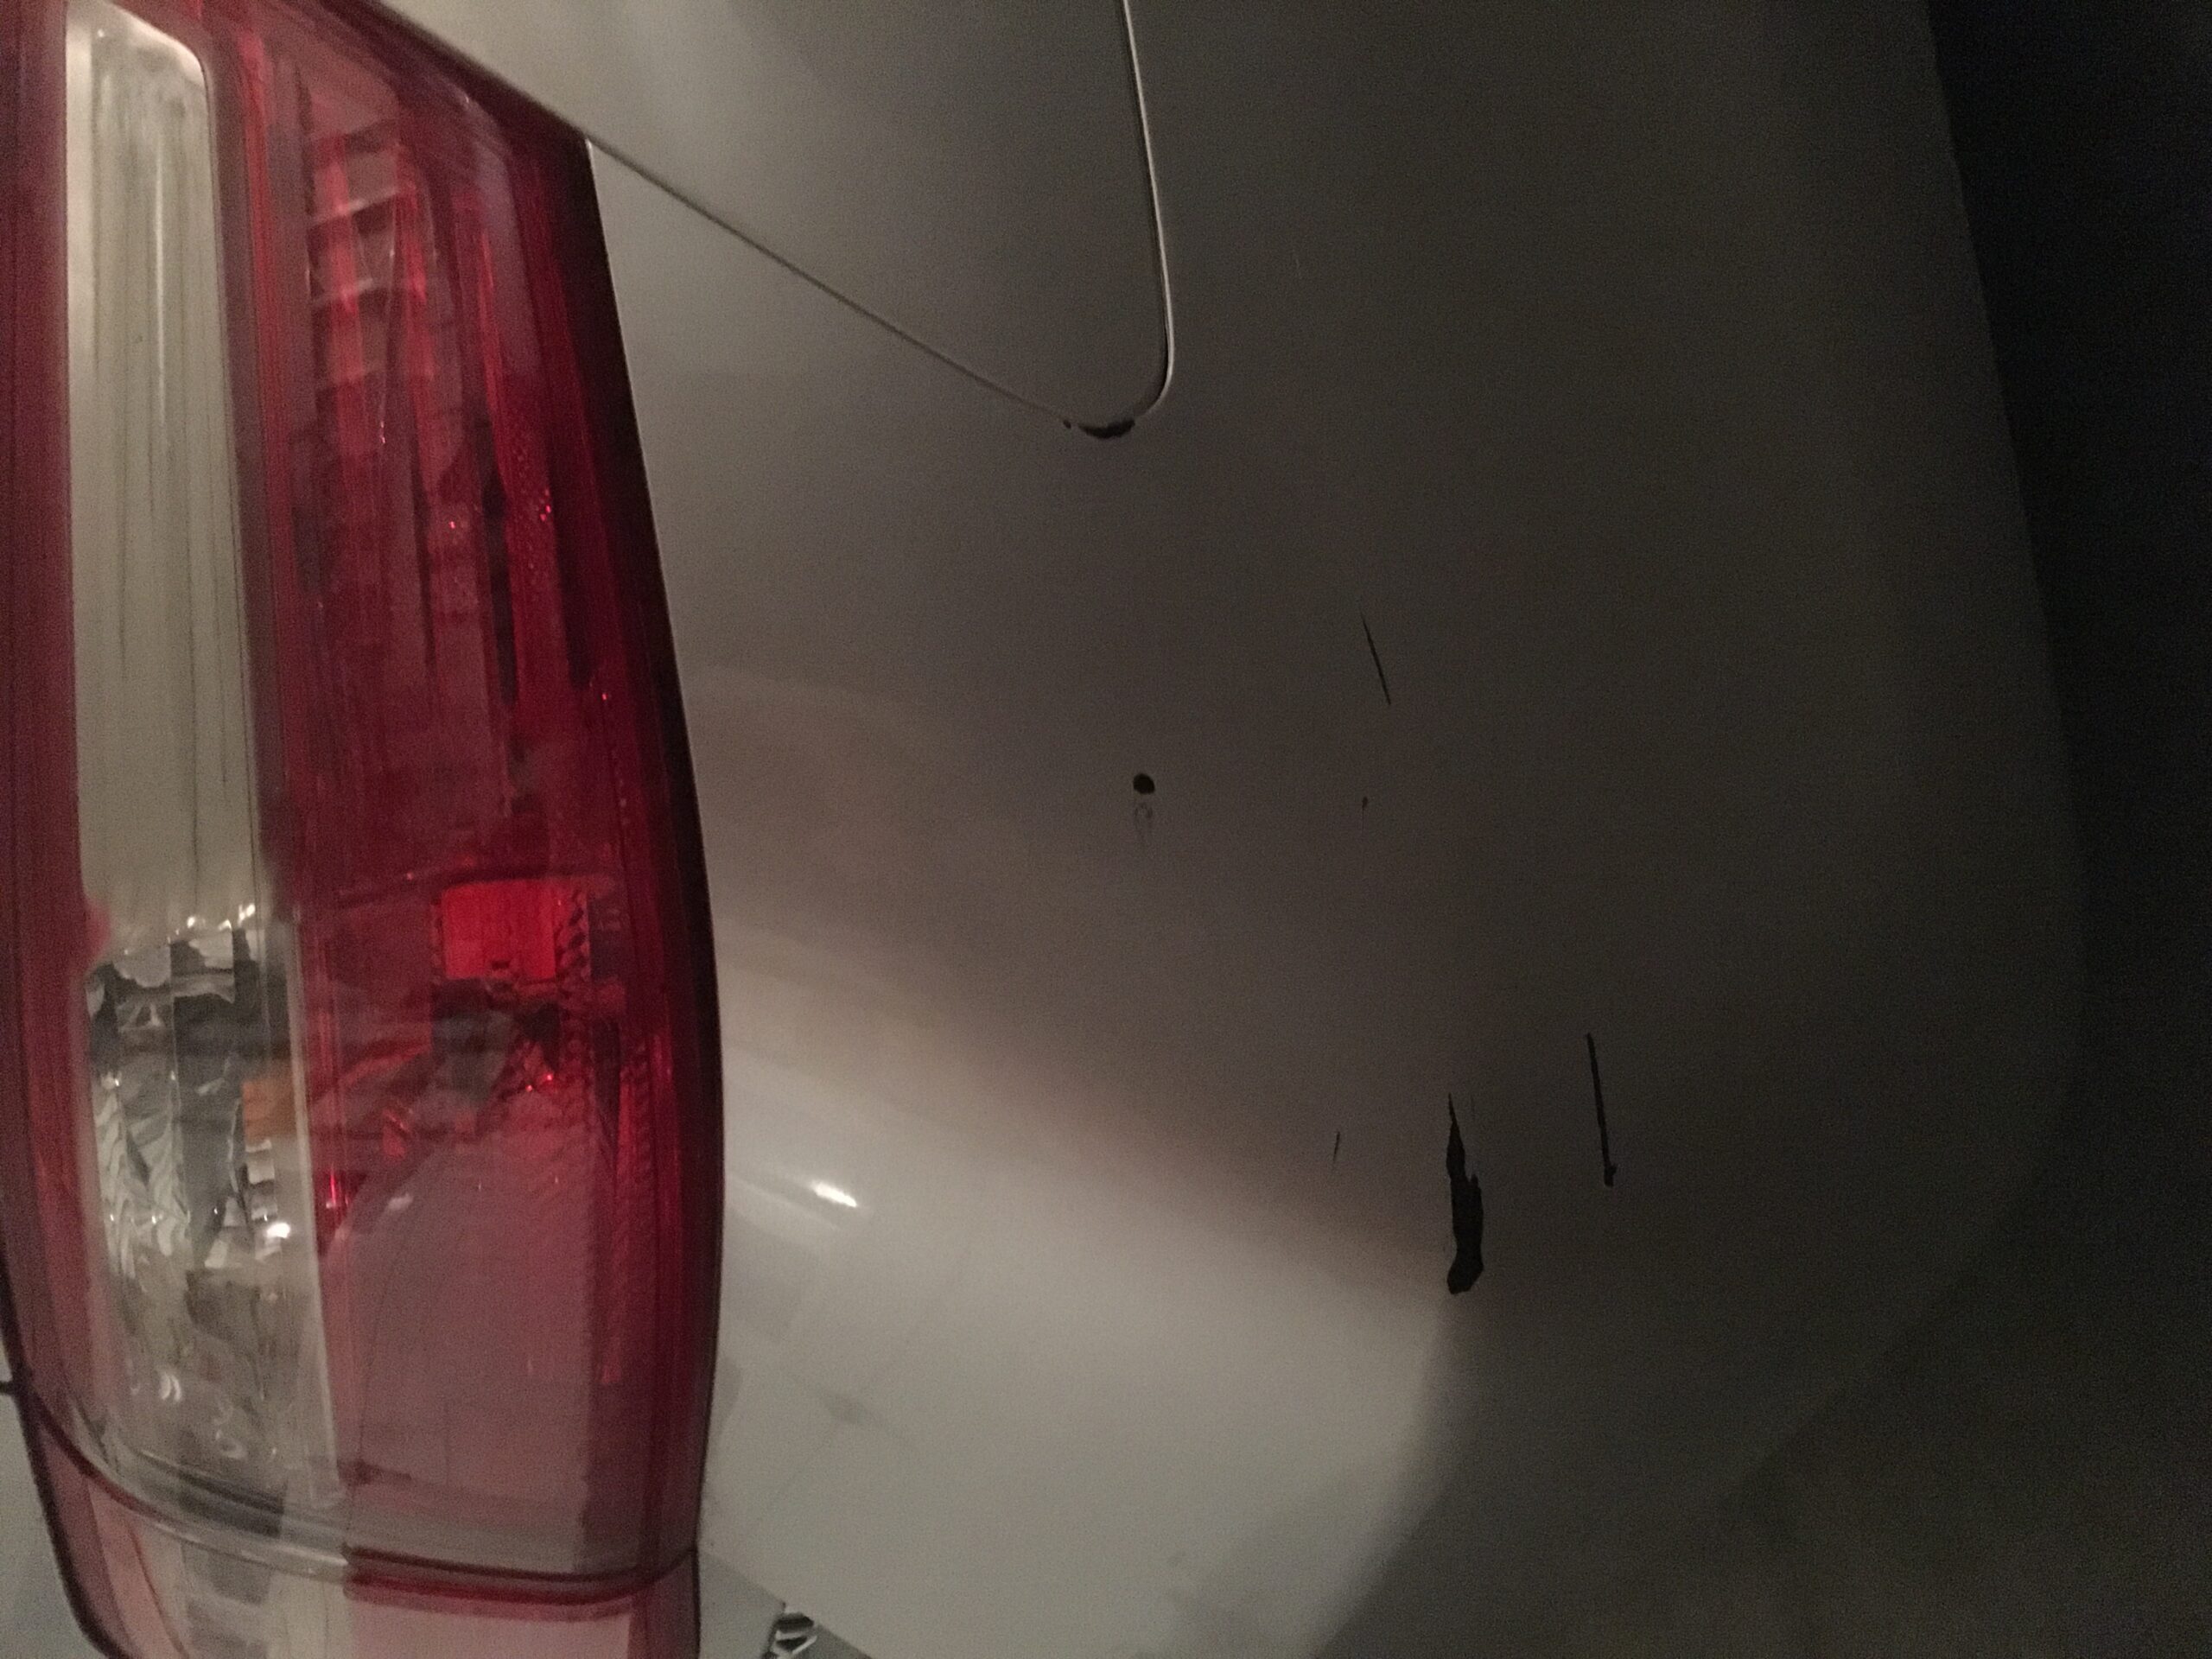 Mom’s Camry Right; Rear Bumper Scratches